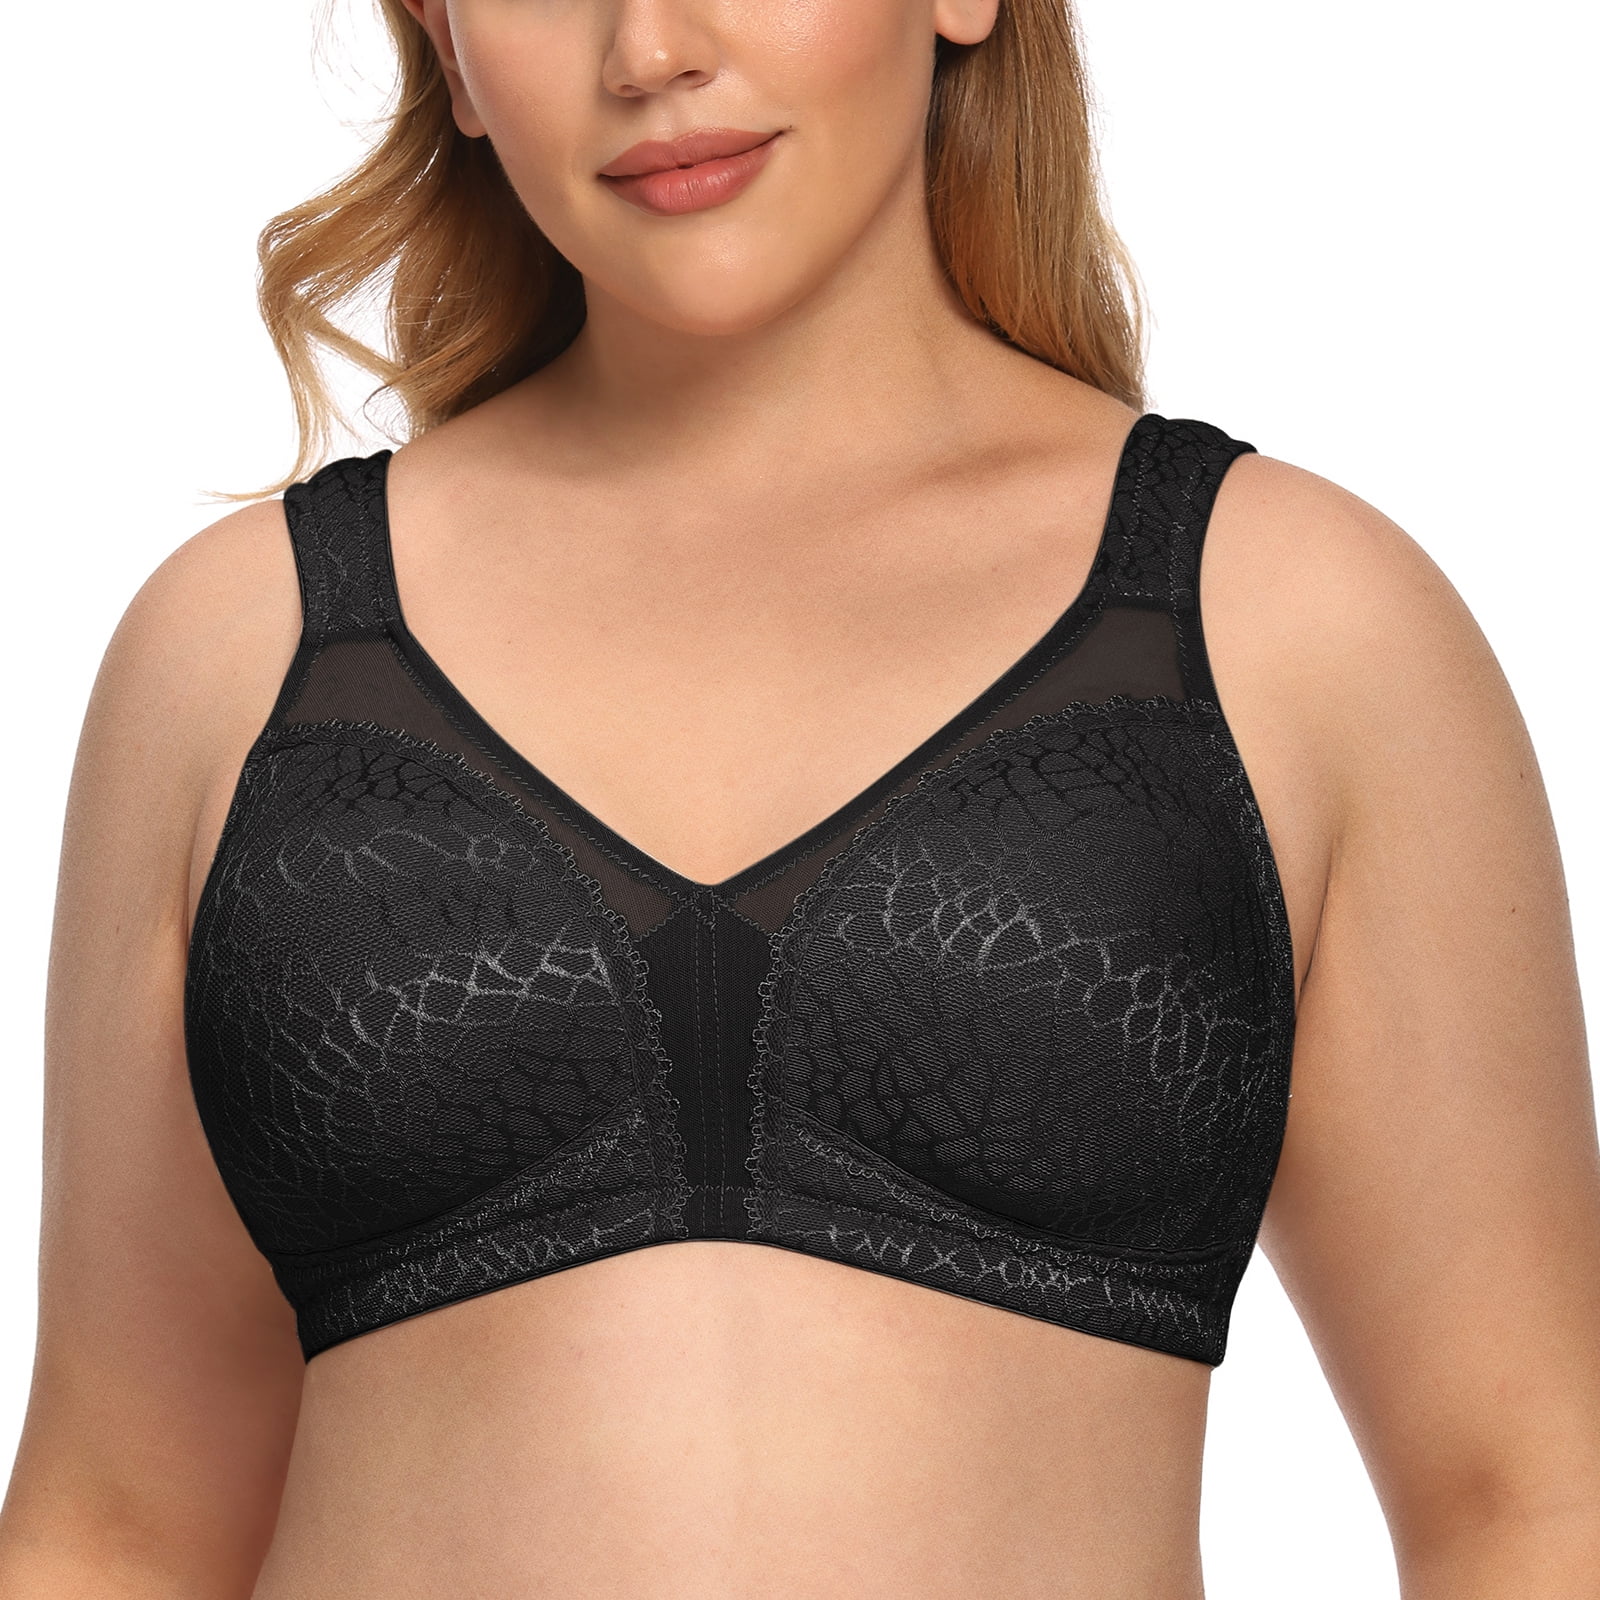 RXIRUCGD Compression Wirefree High Support Bra for Women Plus Size